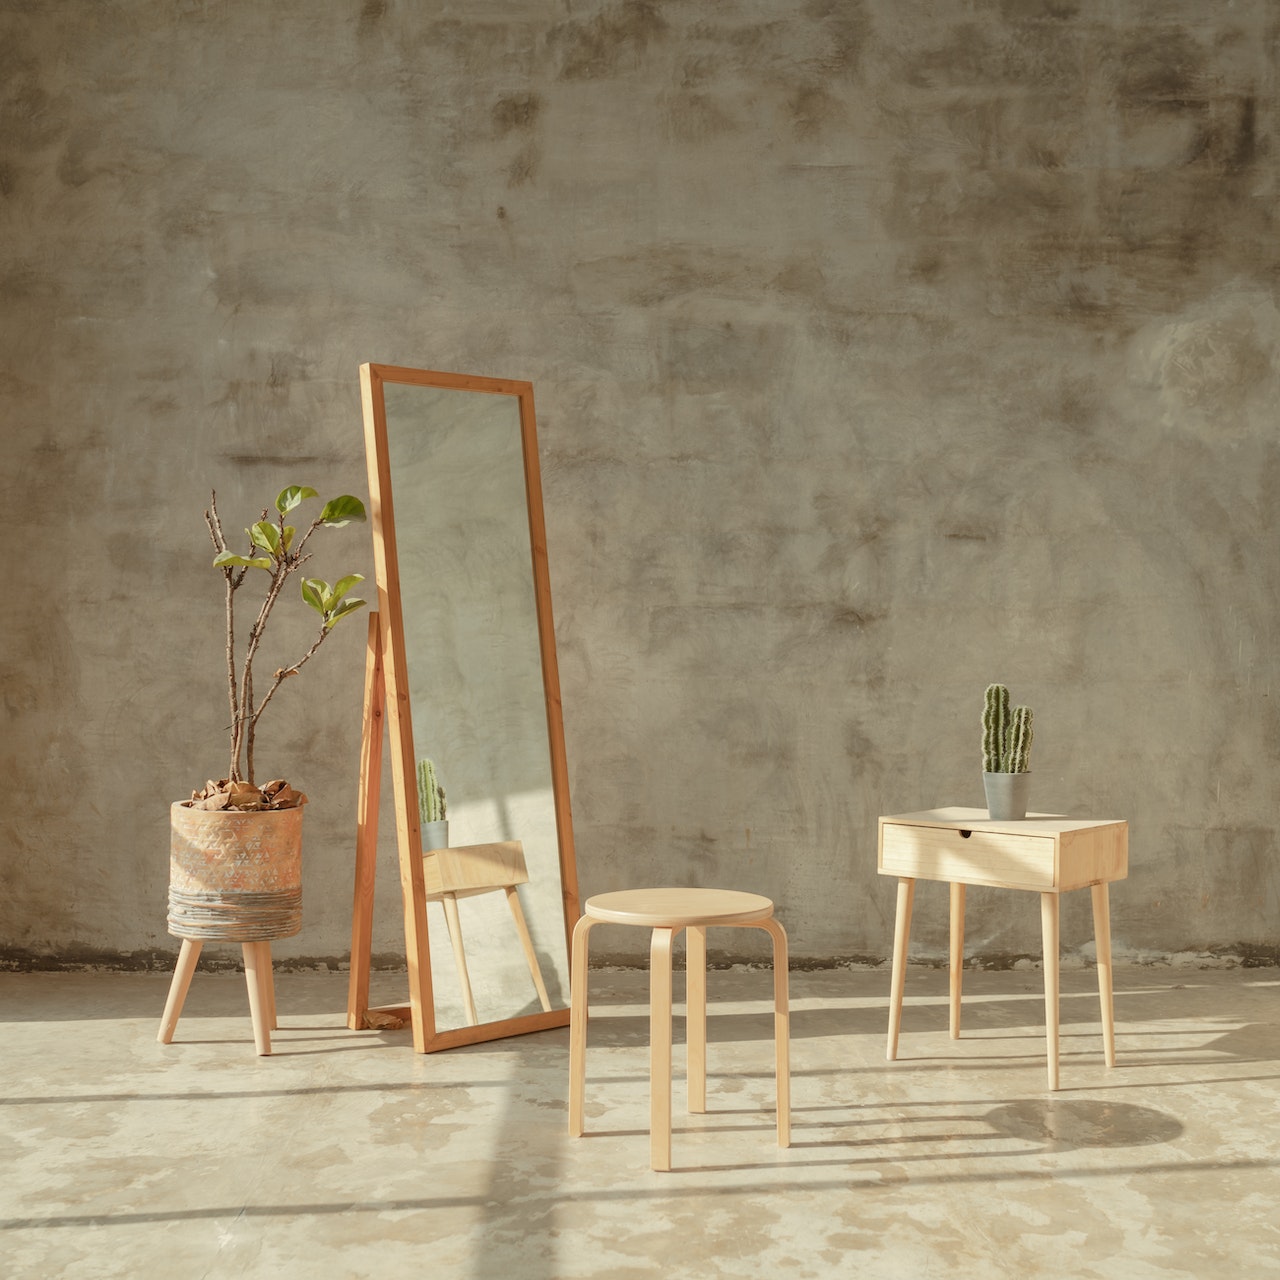 A chair, bedside table, mirror and plant in an empty room with warm light shining in